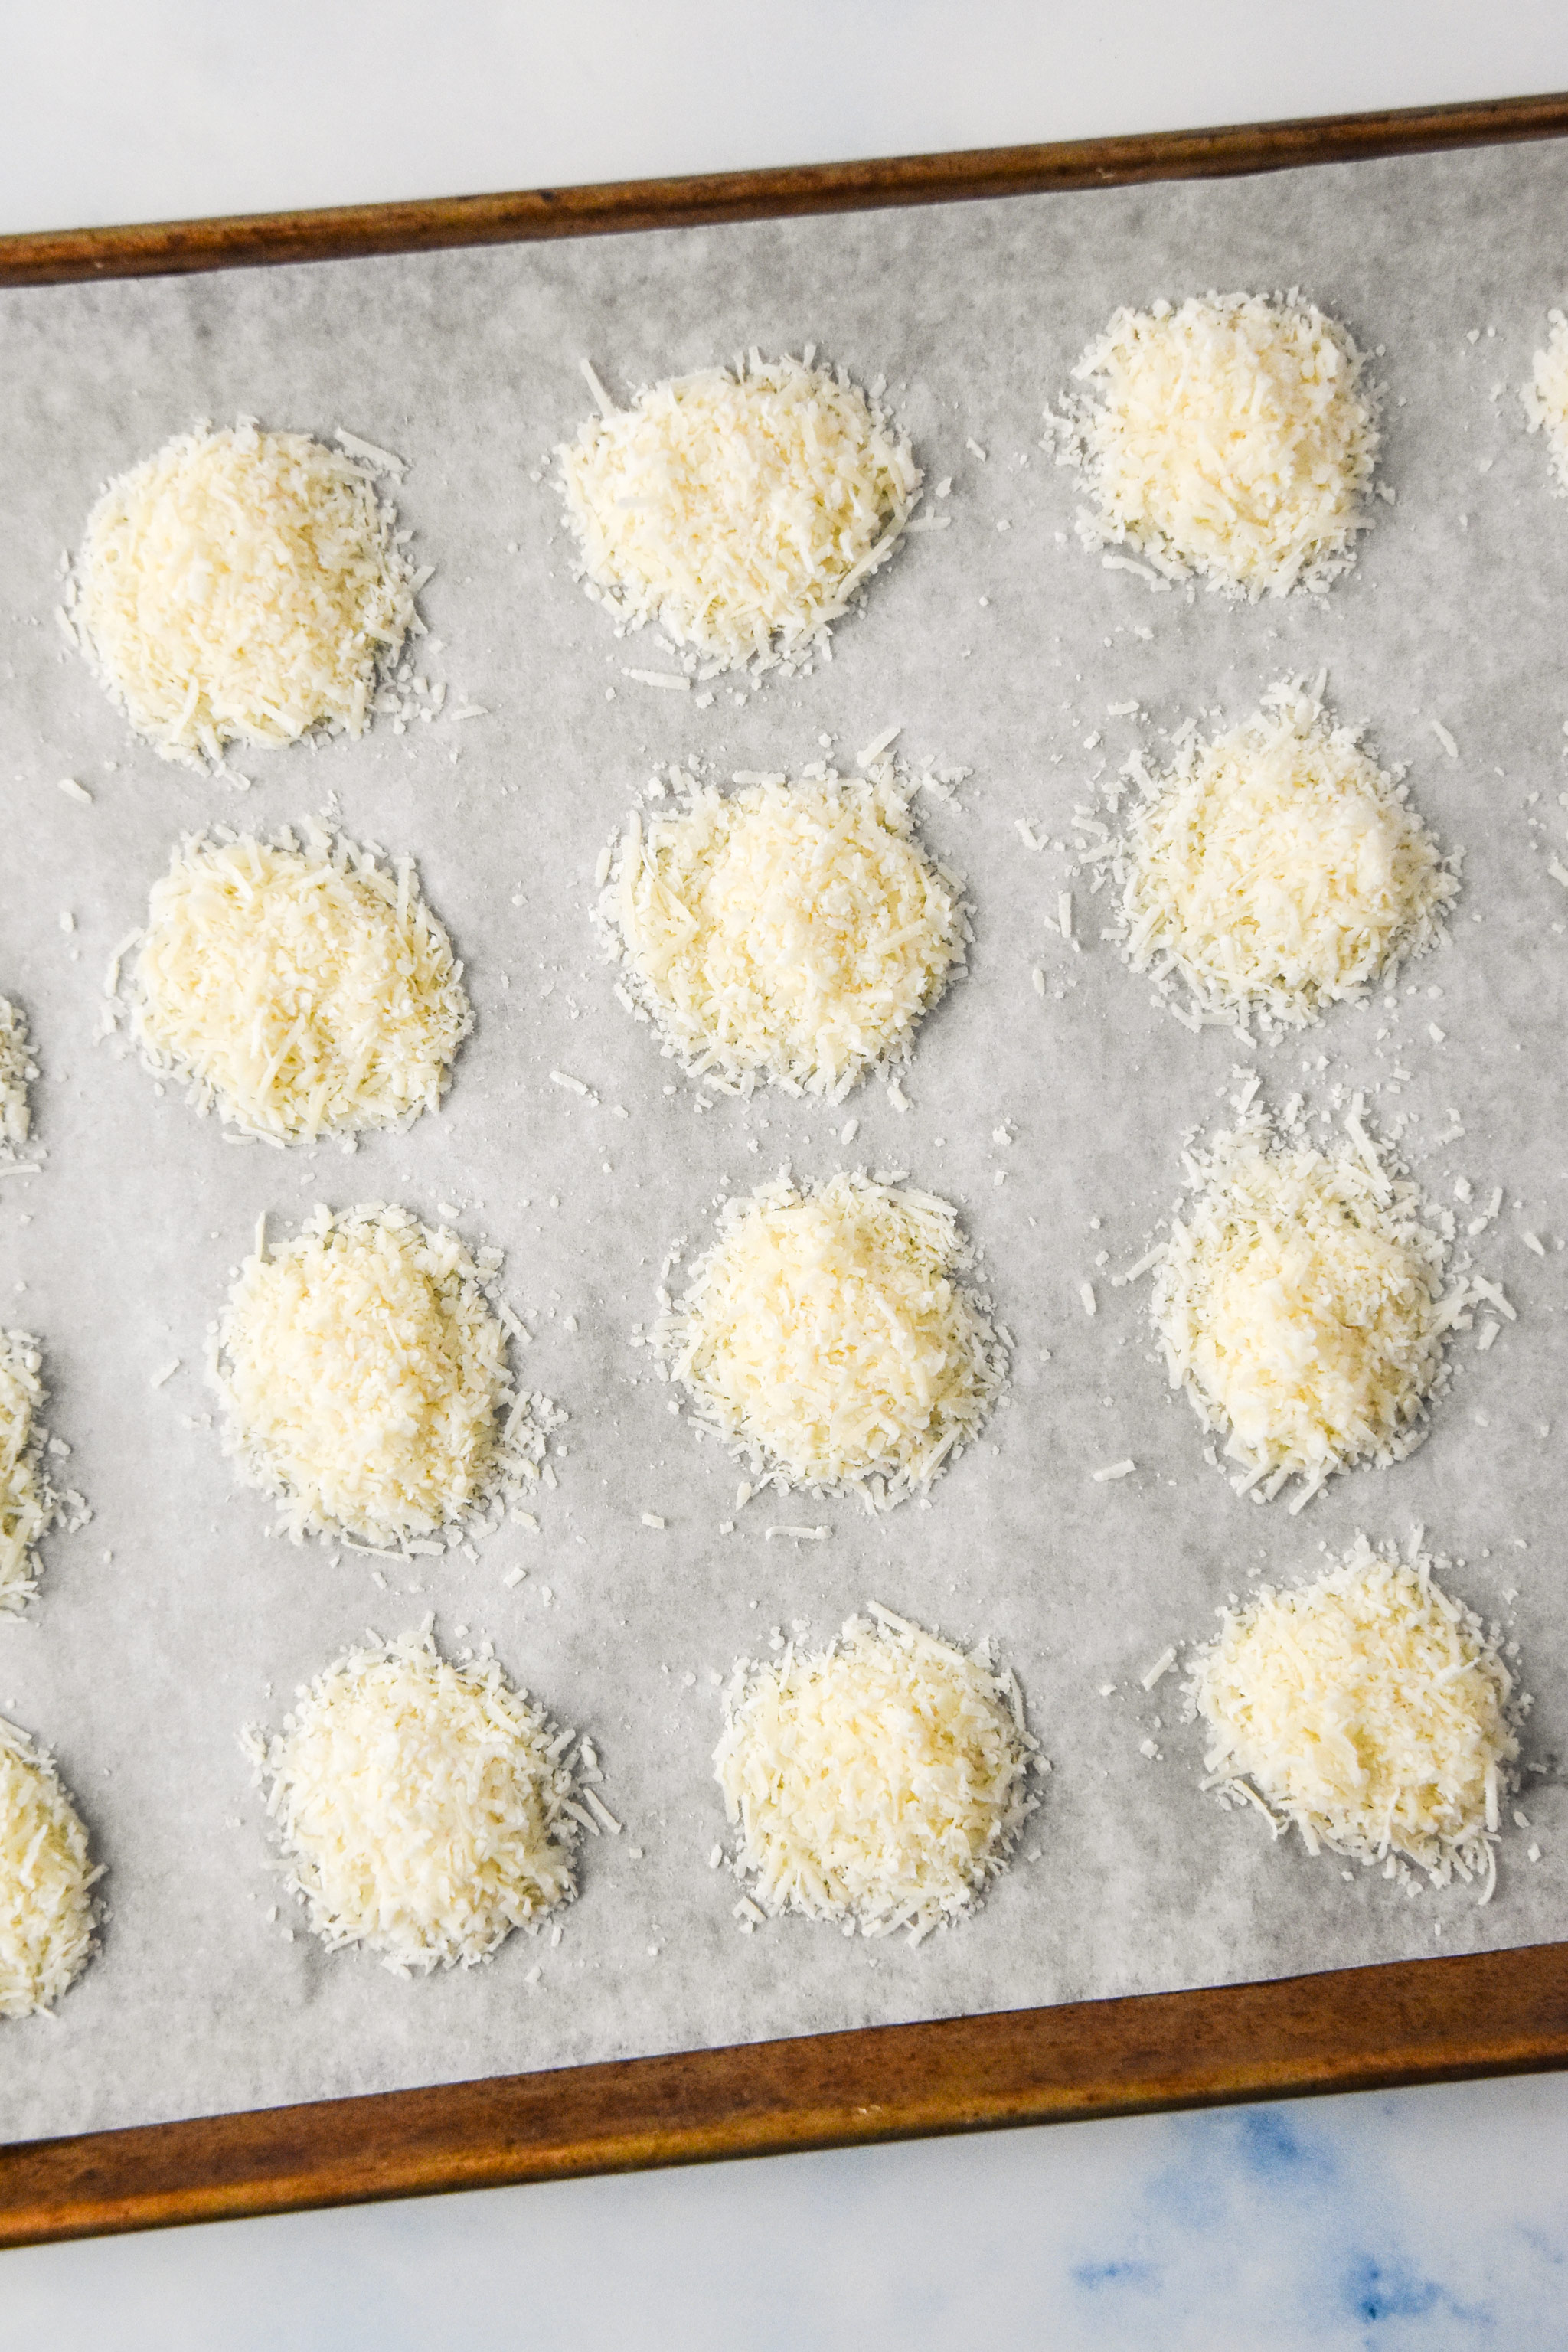 piles of parmesan cheese on a baking sheet top view